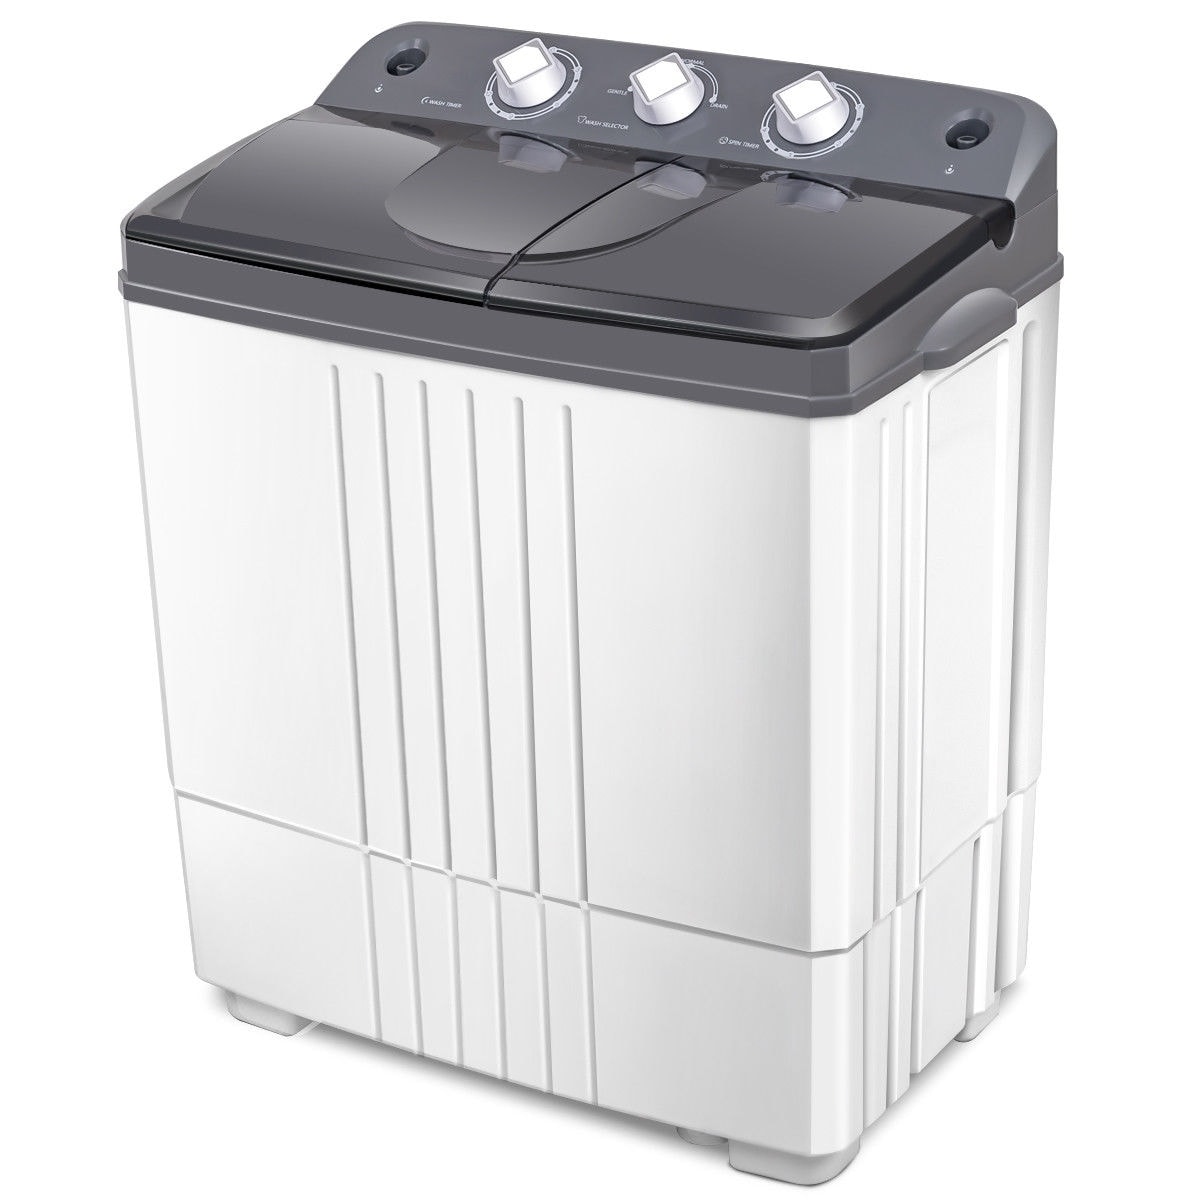 Portable Washing Machine Compact lightweight 10lbs Washer w/ Spin